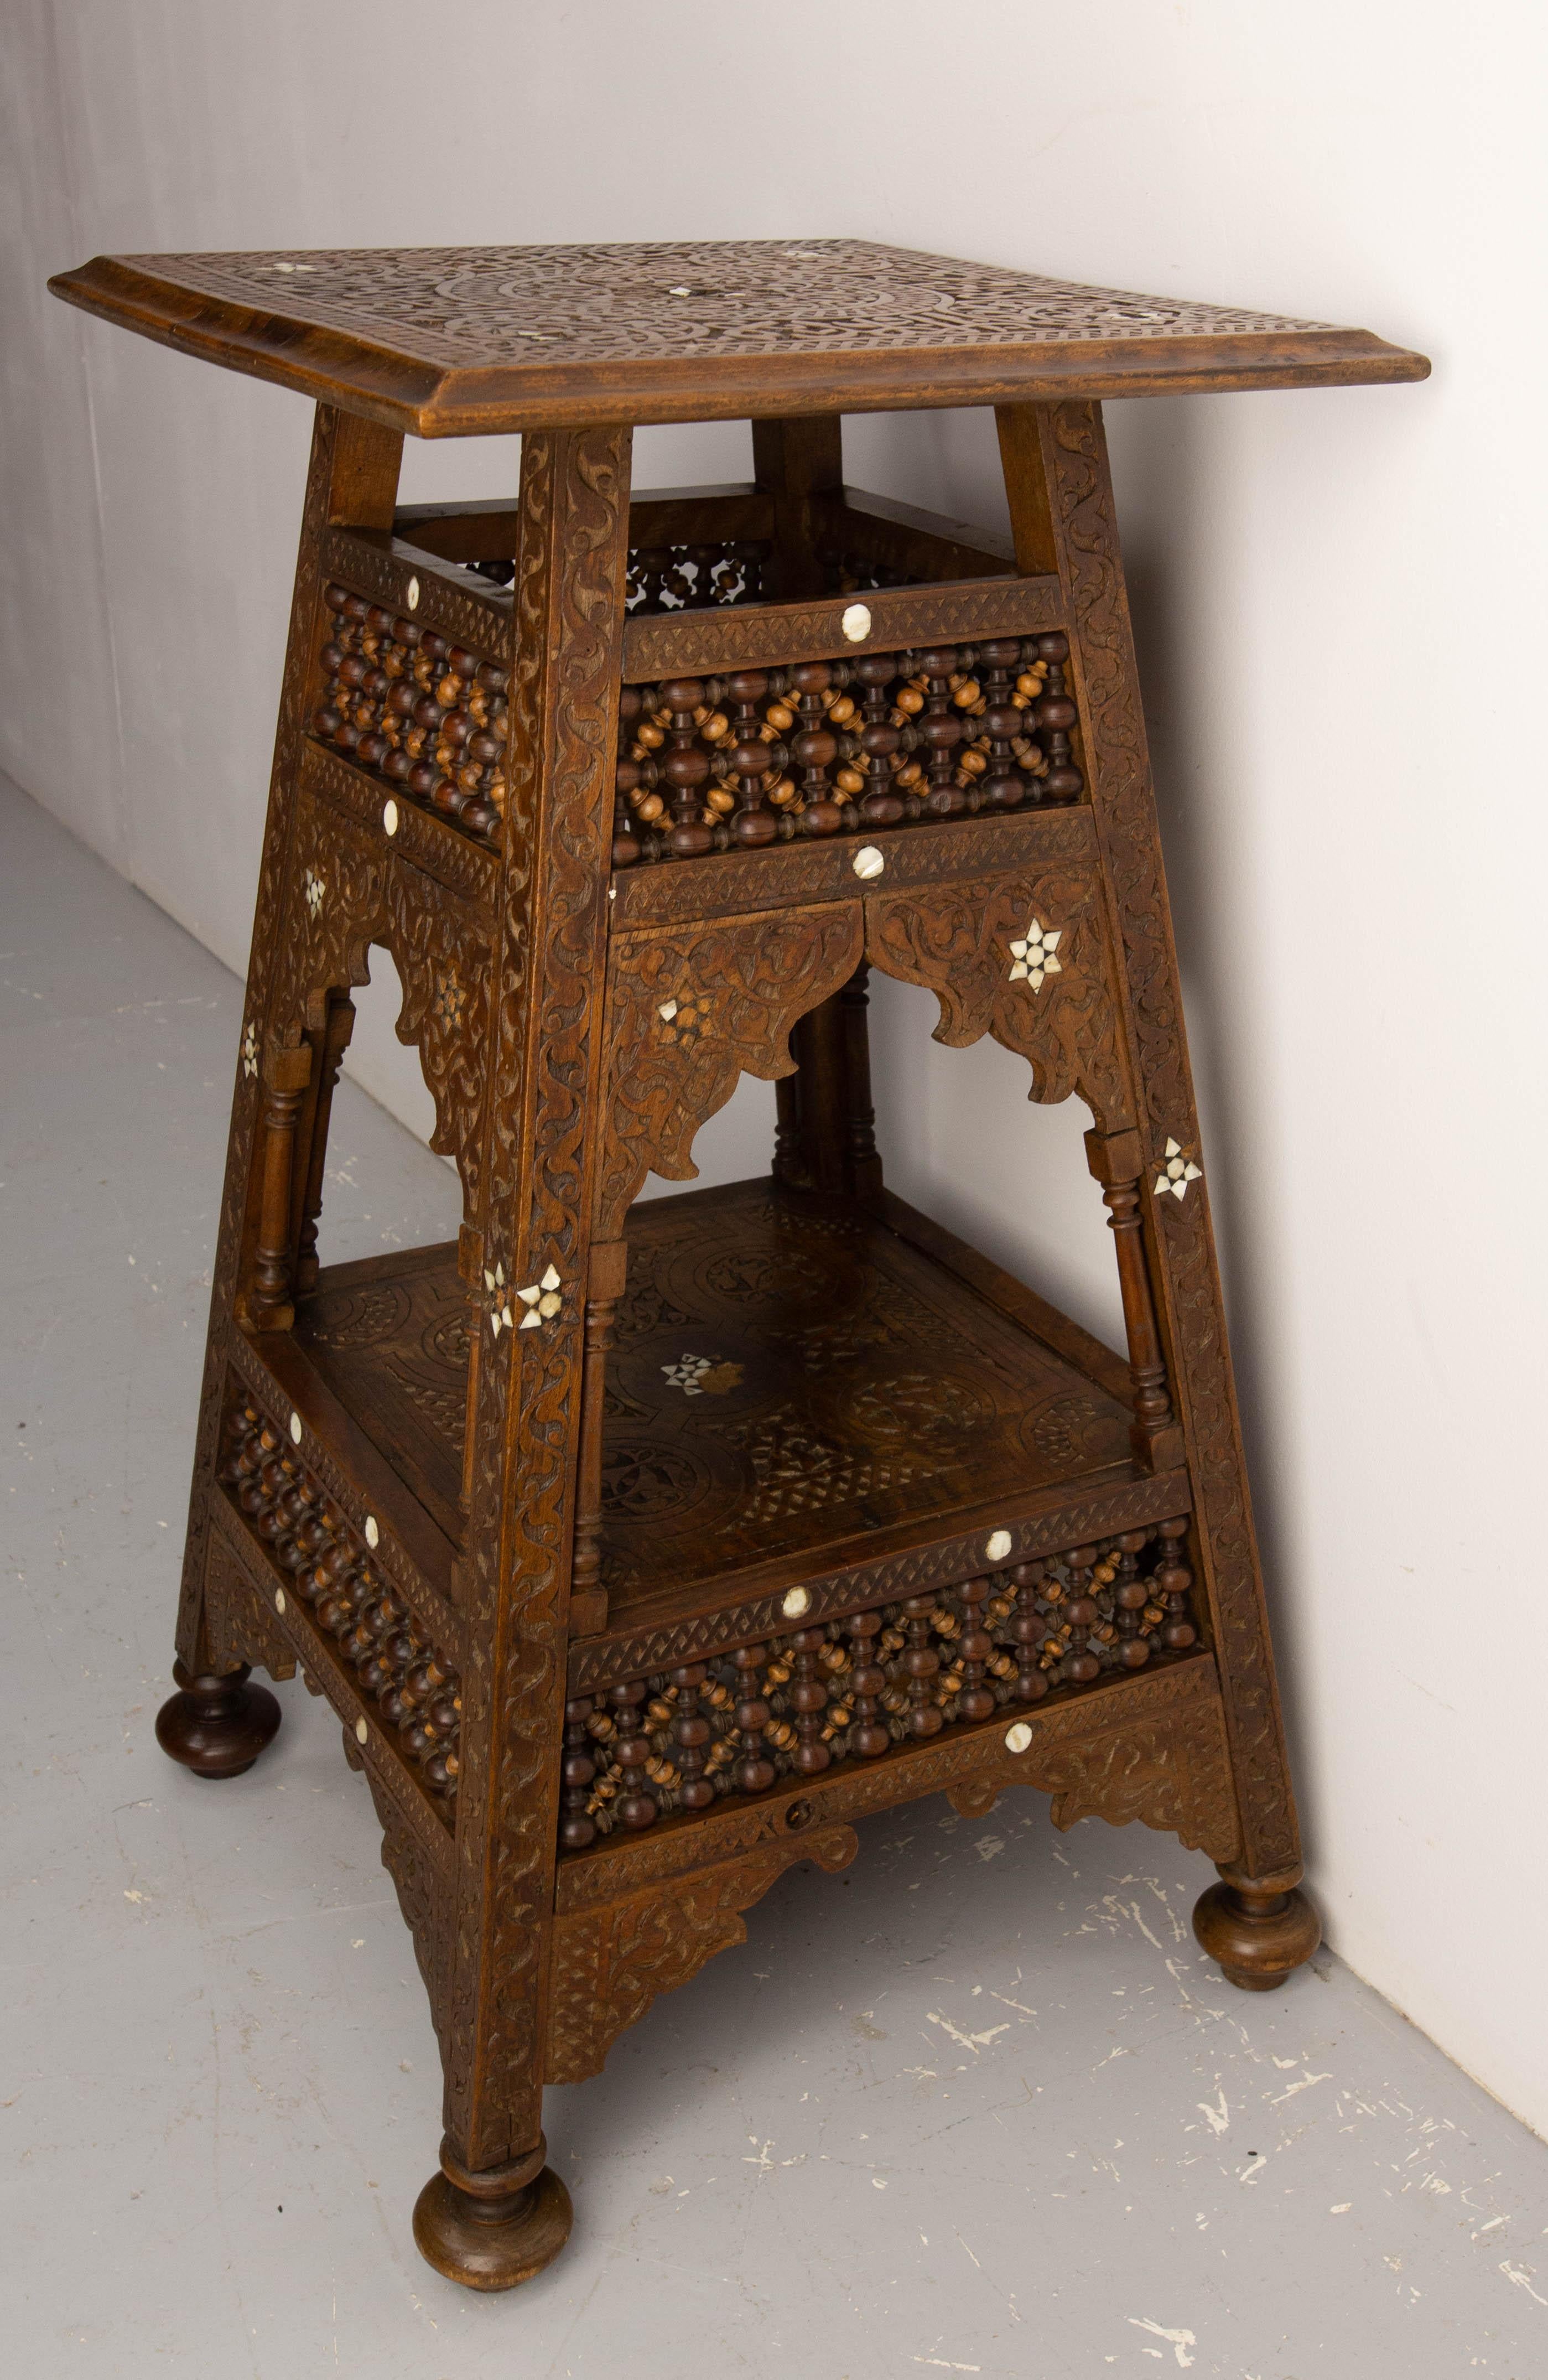 Mid-Century Modern Syrian Hand-Carved & Inlaid Pedestal, early 20th century For Sale